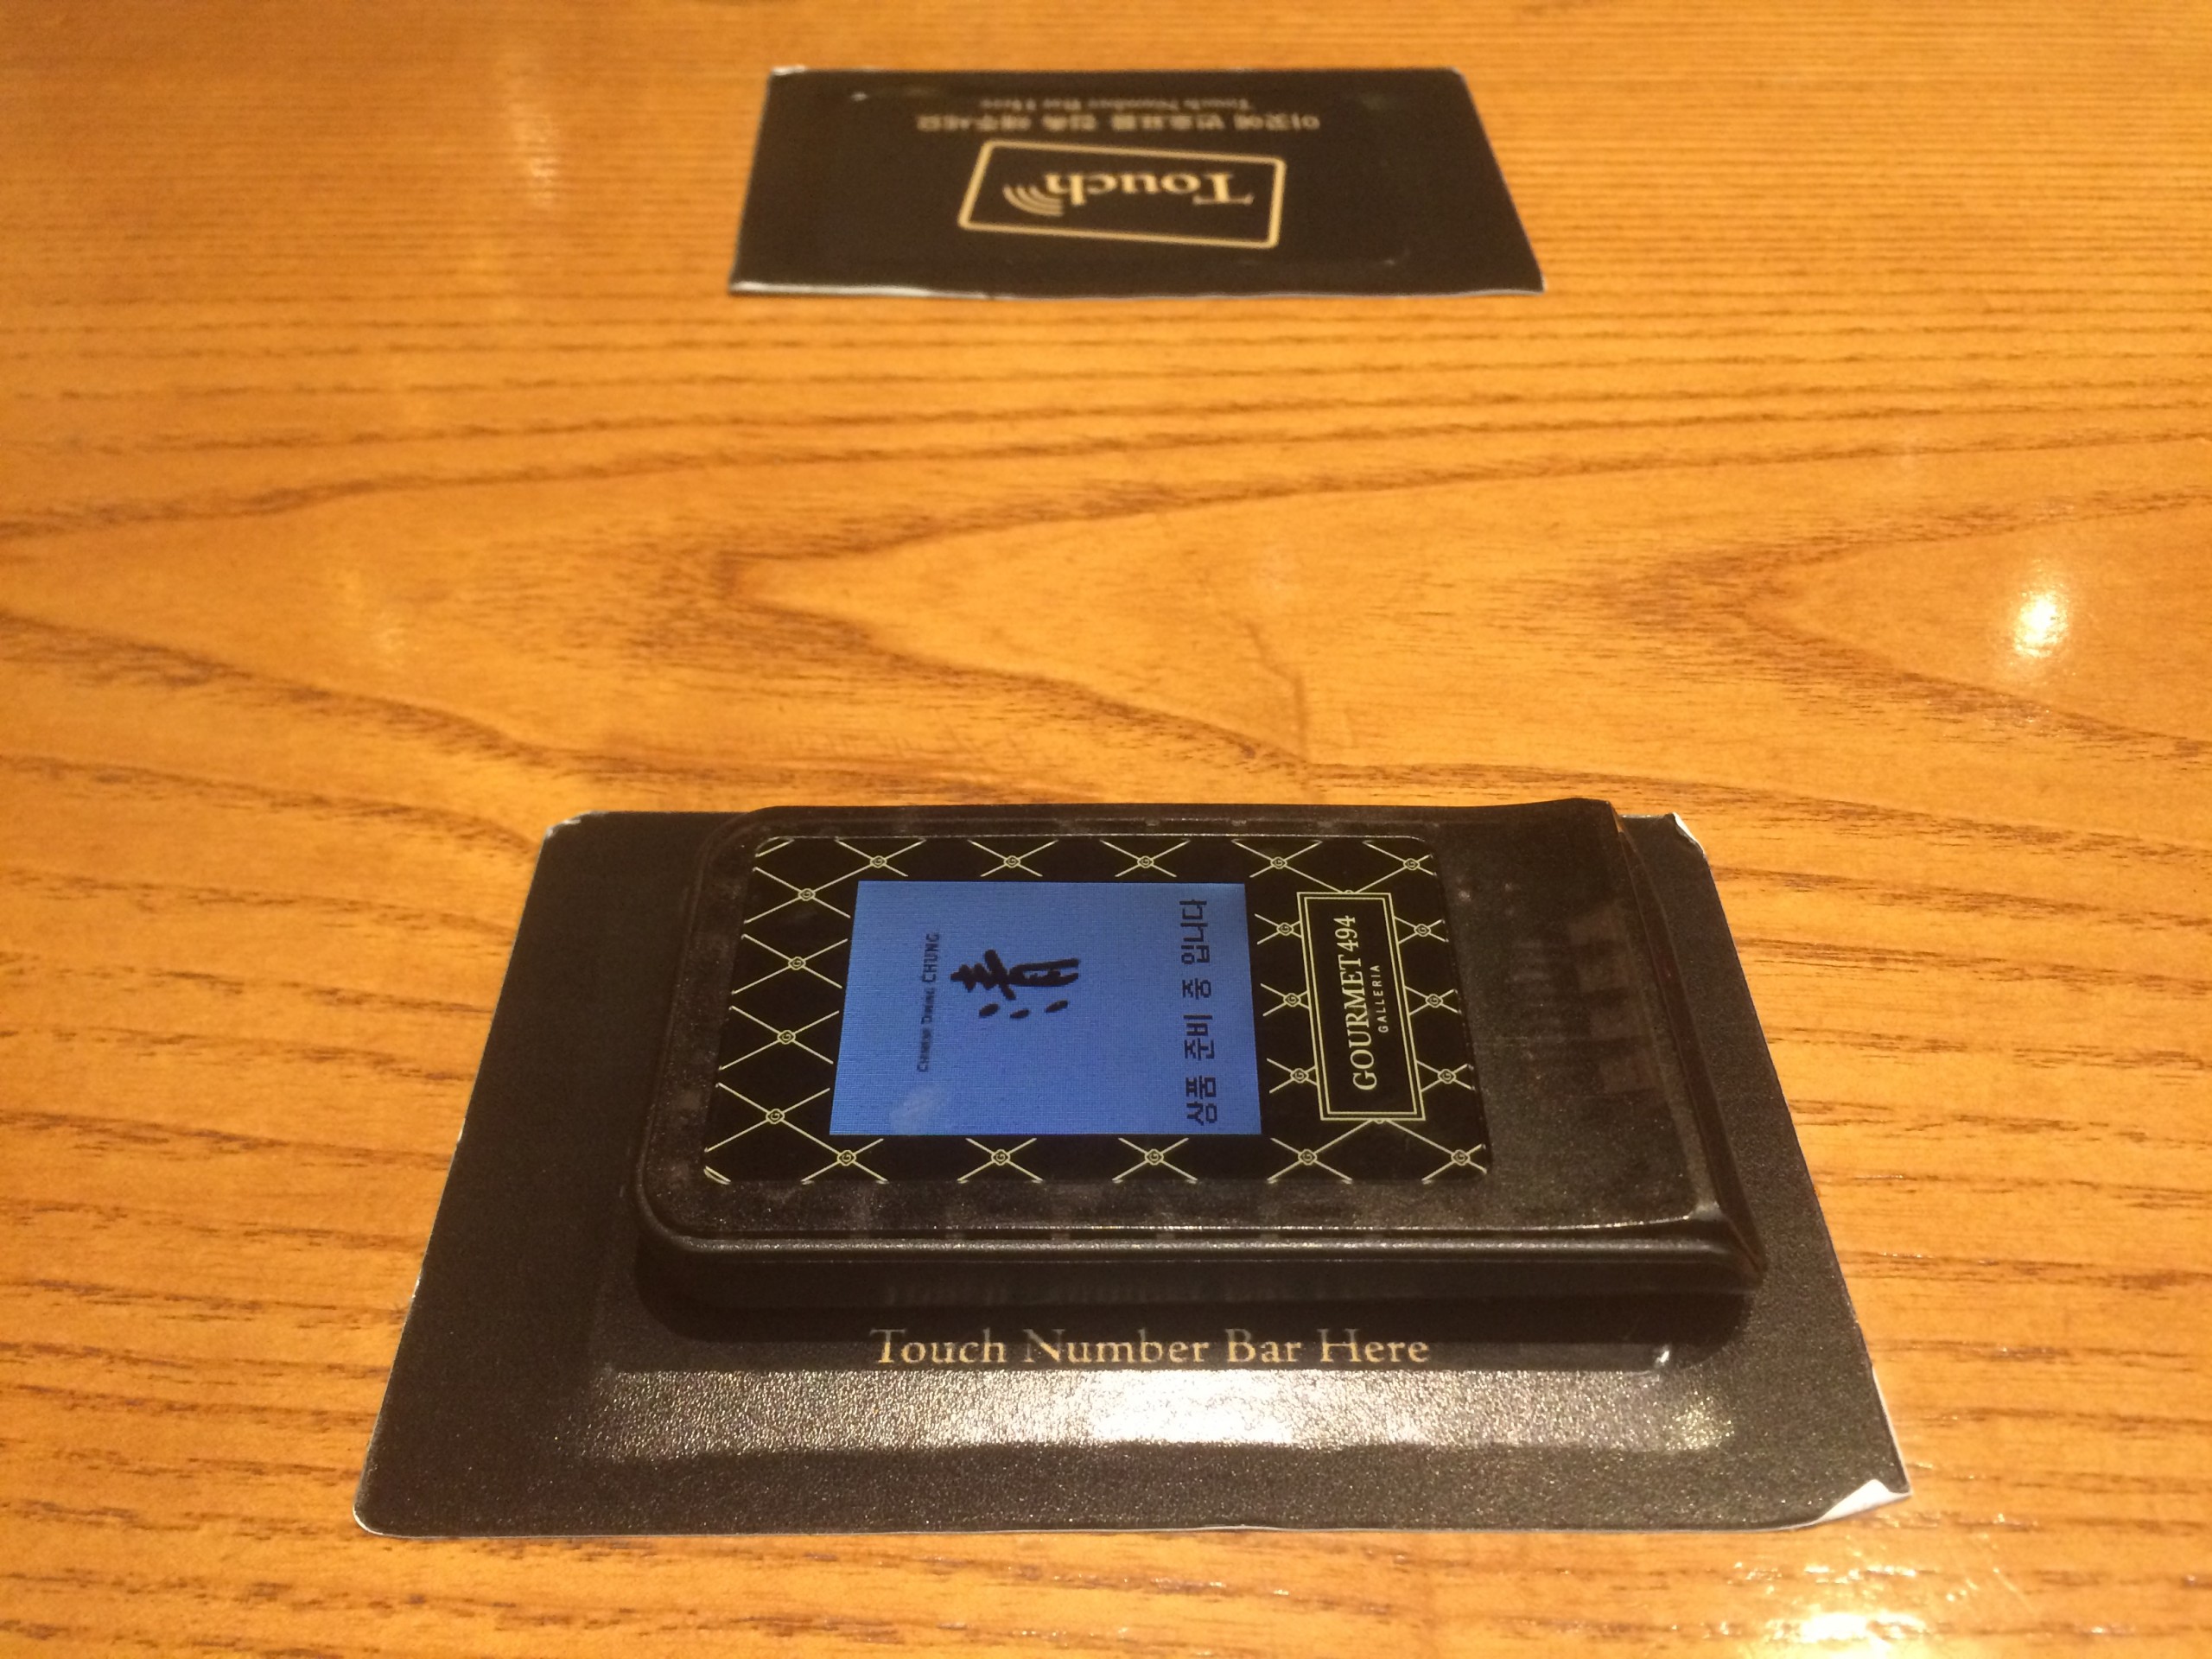 Sensors on the table let the restaurants know where you're sitting